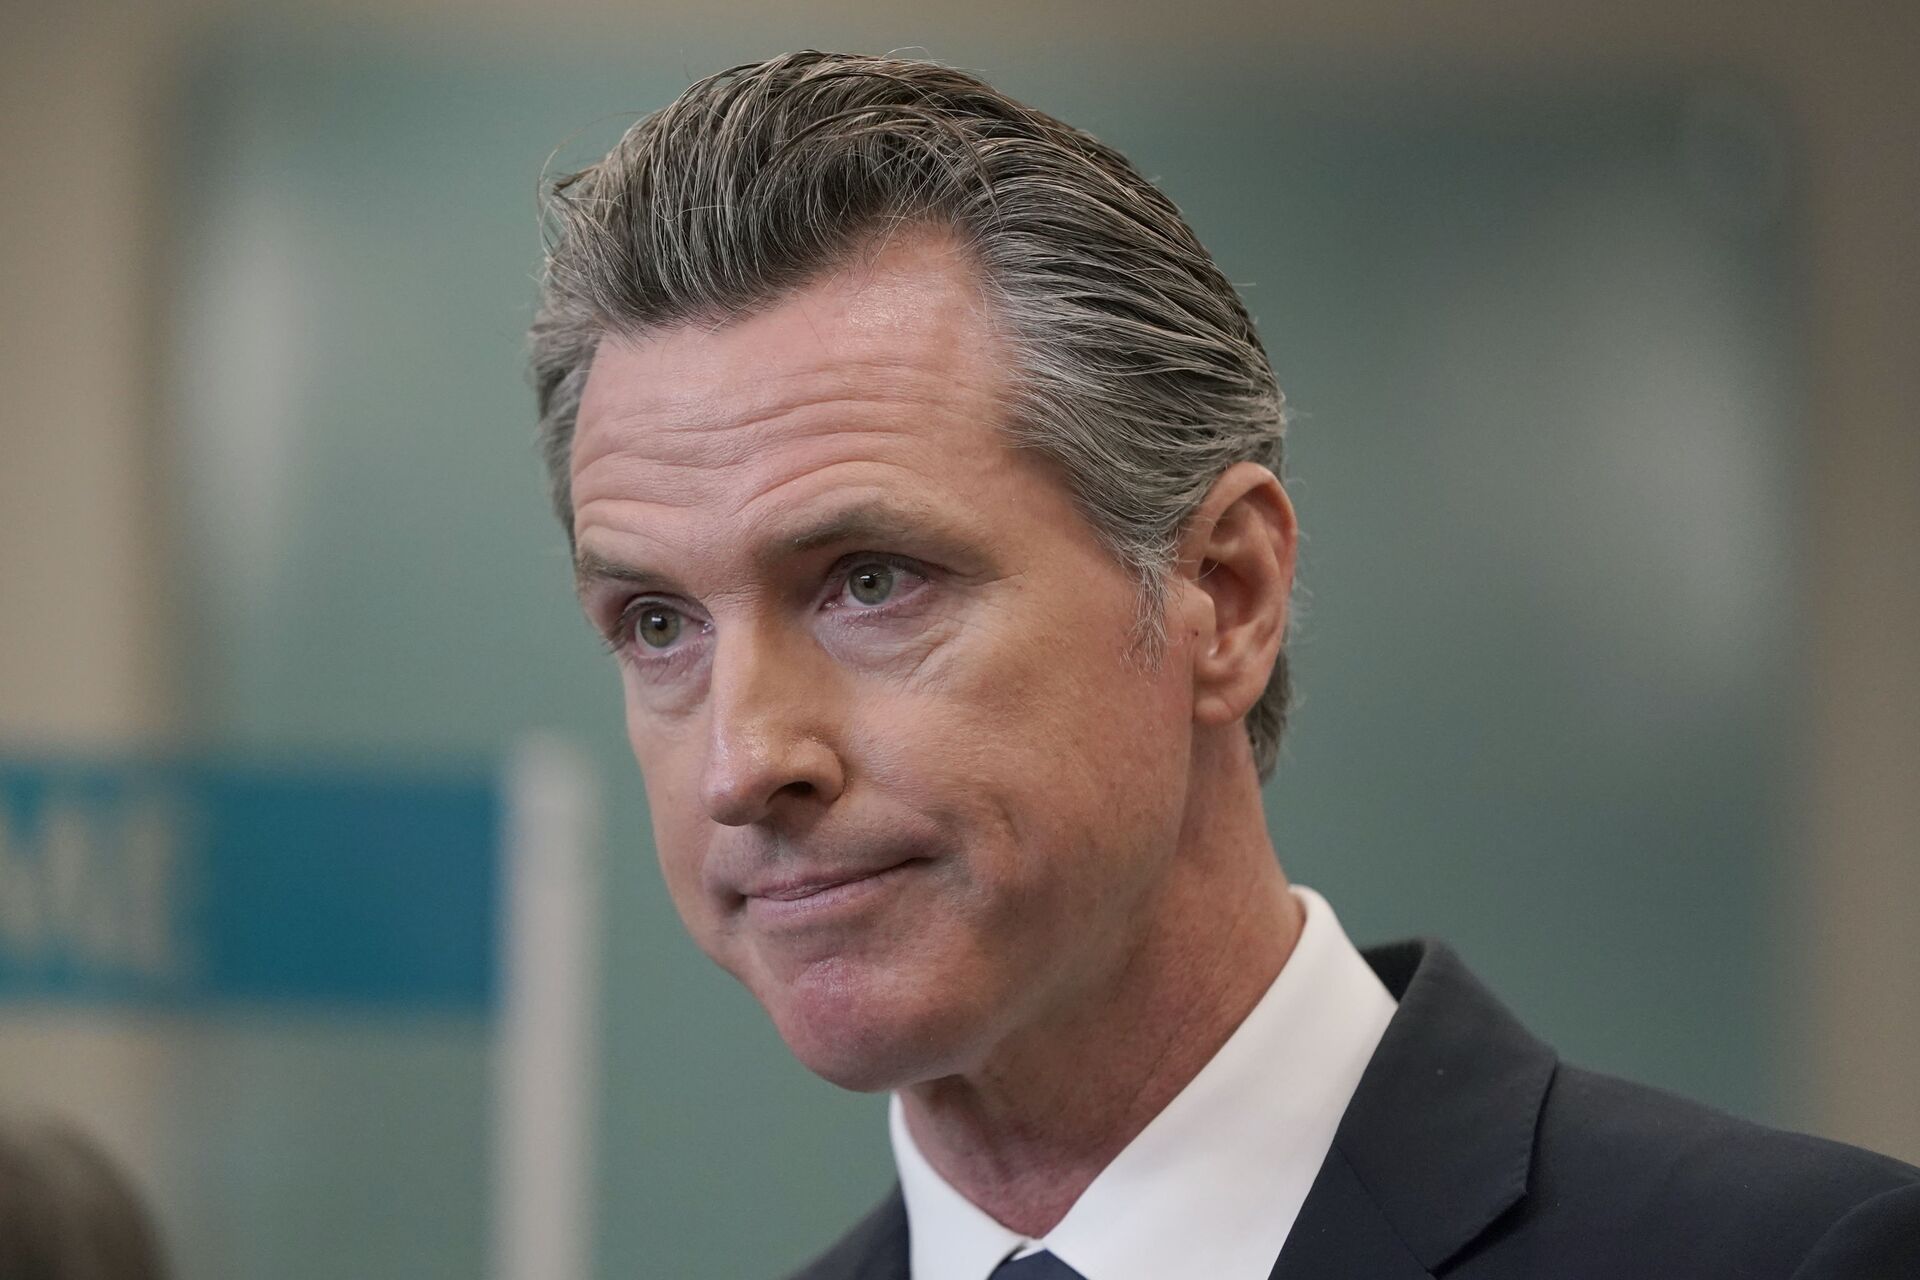 FILE — In this July 26, 2021, file photo, Gov. Gavin Newsom appears at a news conference in Oakland, Calif. Supporters of the effort to recall Newsom are asking a court to prohibit him from calling the effort sRepublican recall in the state's official voter guide. The lawsuit was filed by July 30, 2021, by Orrin Heatlie, the Republican activist who launched the recall effort. - Sputnik International, 1920, 26.09.2022